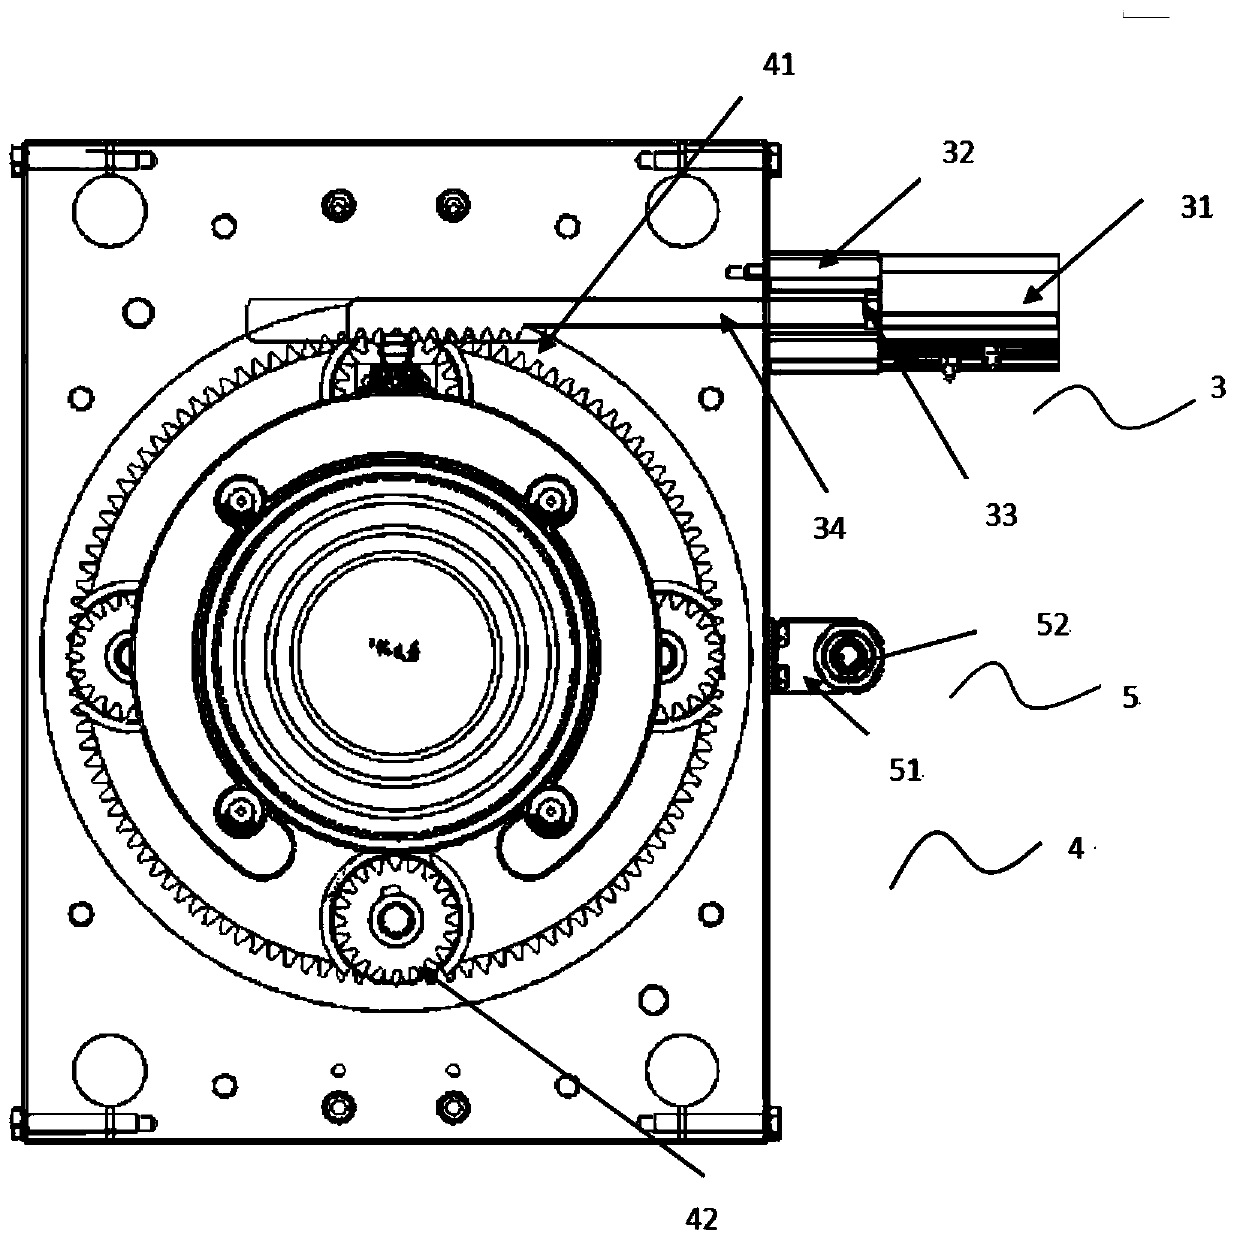 Bottom cover separating device and packaging equipment